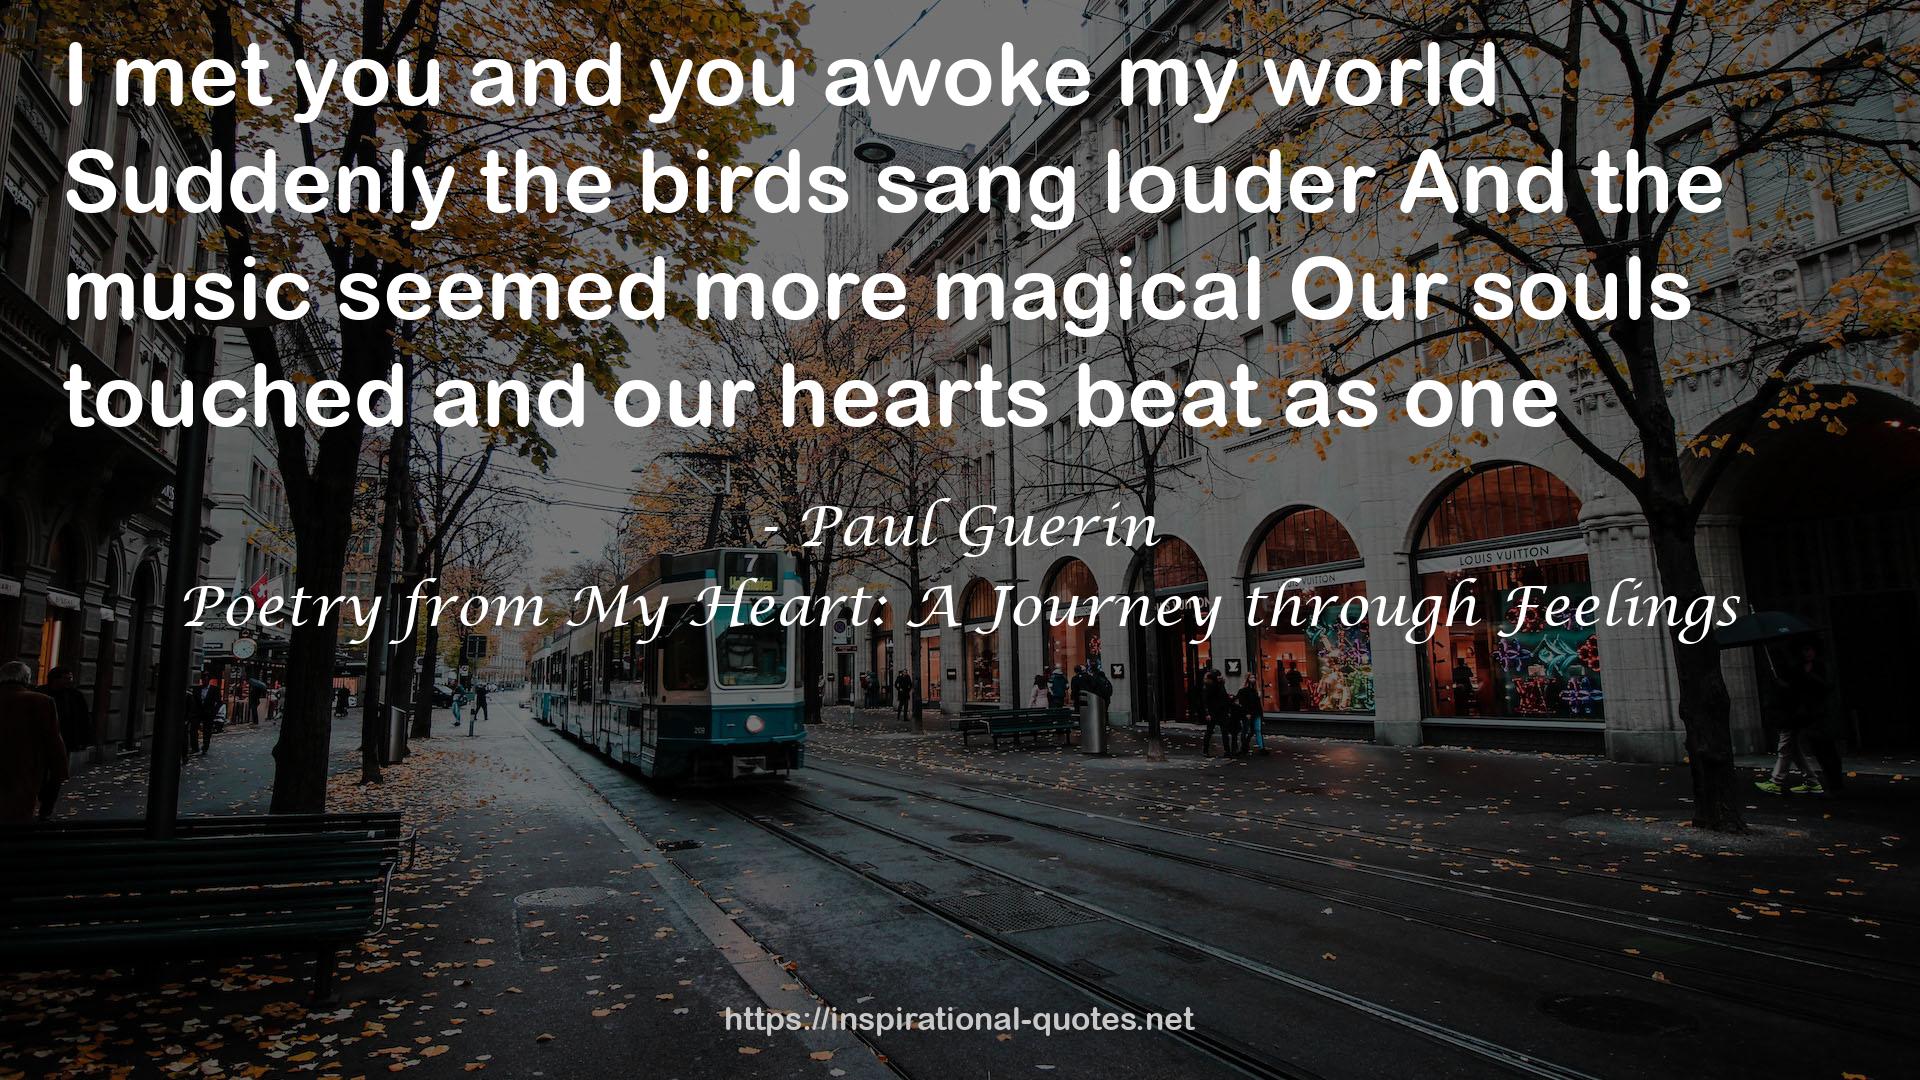 Paul Guerin QUOTES